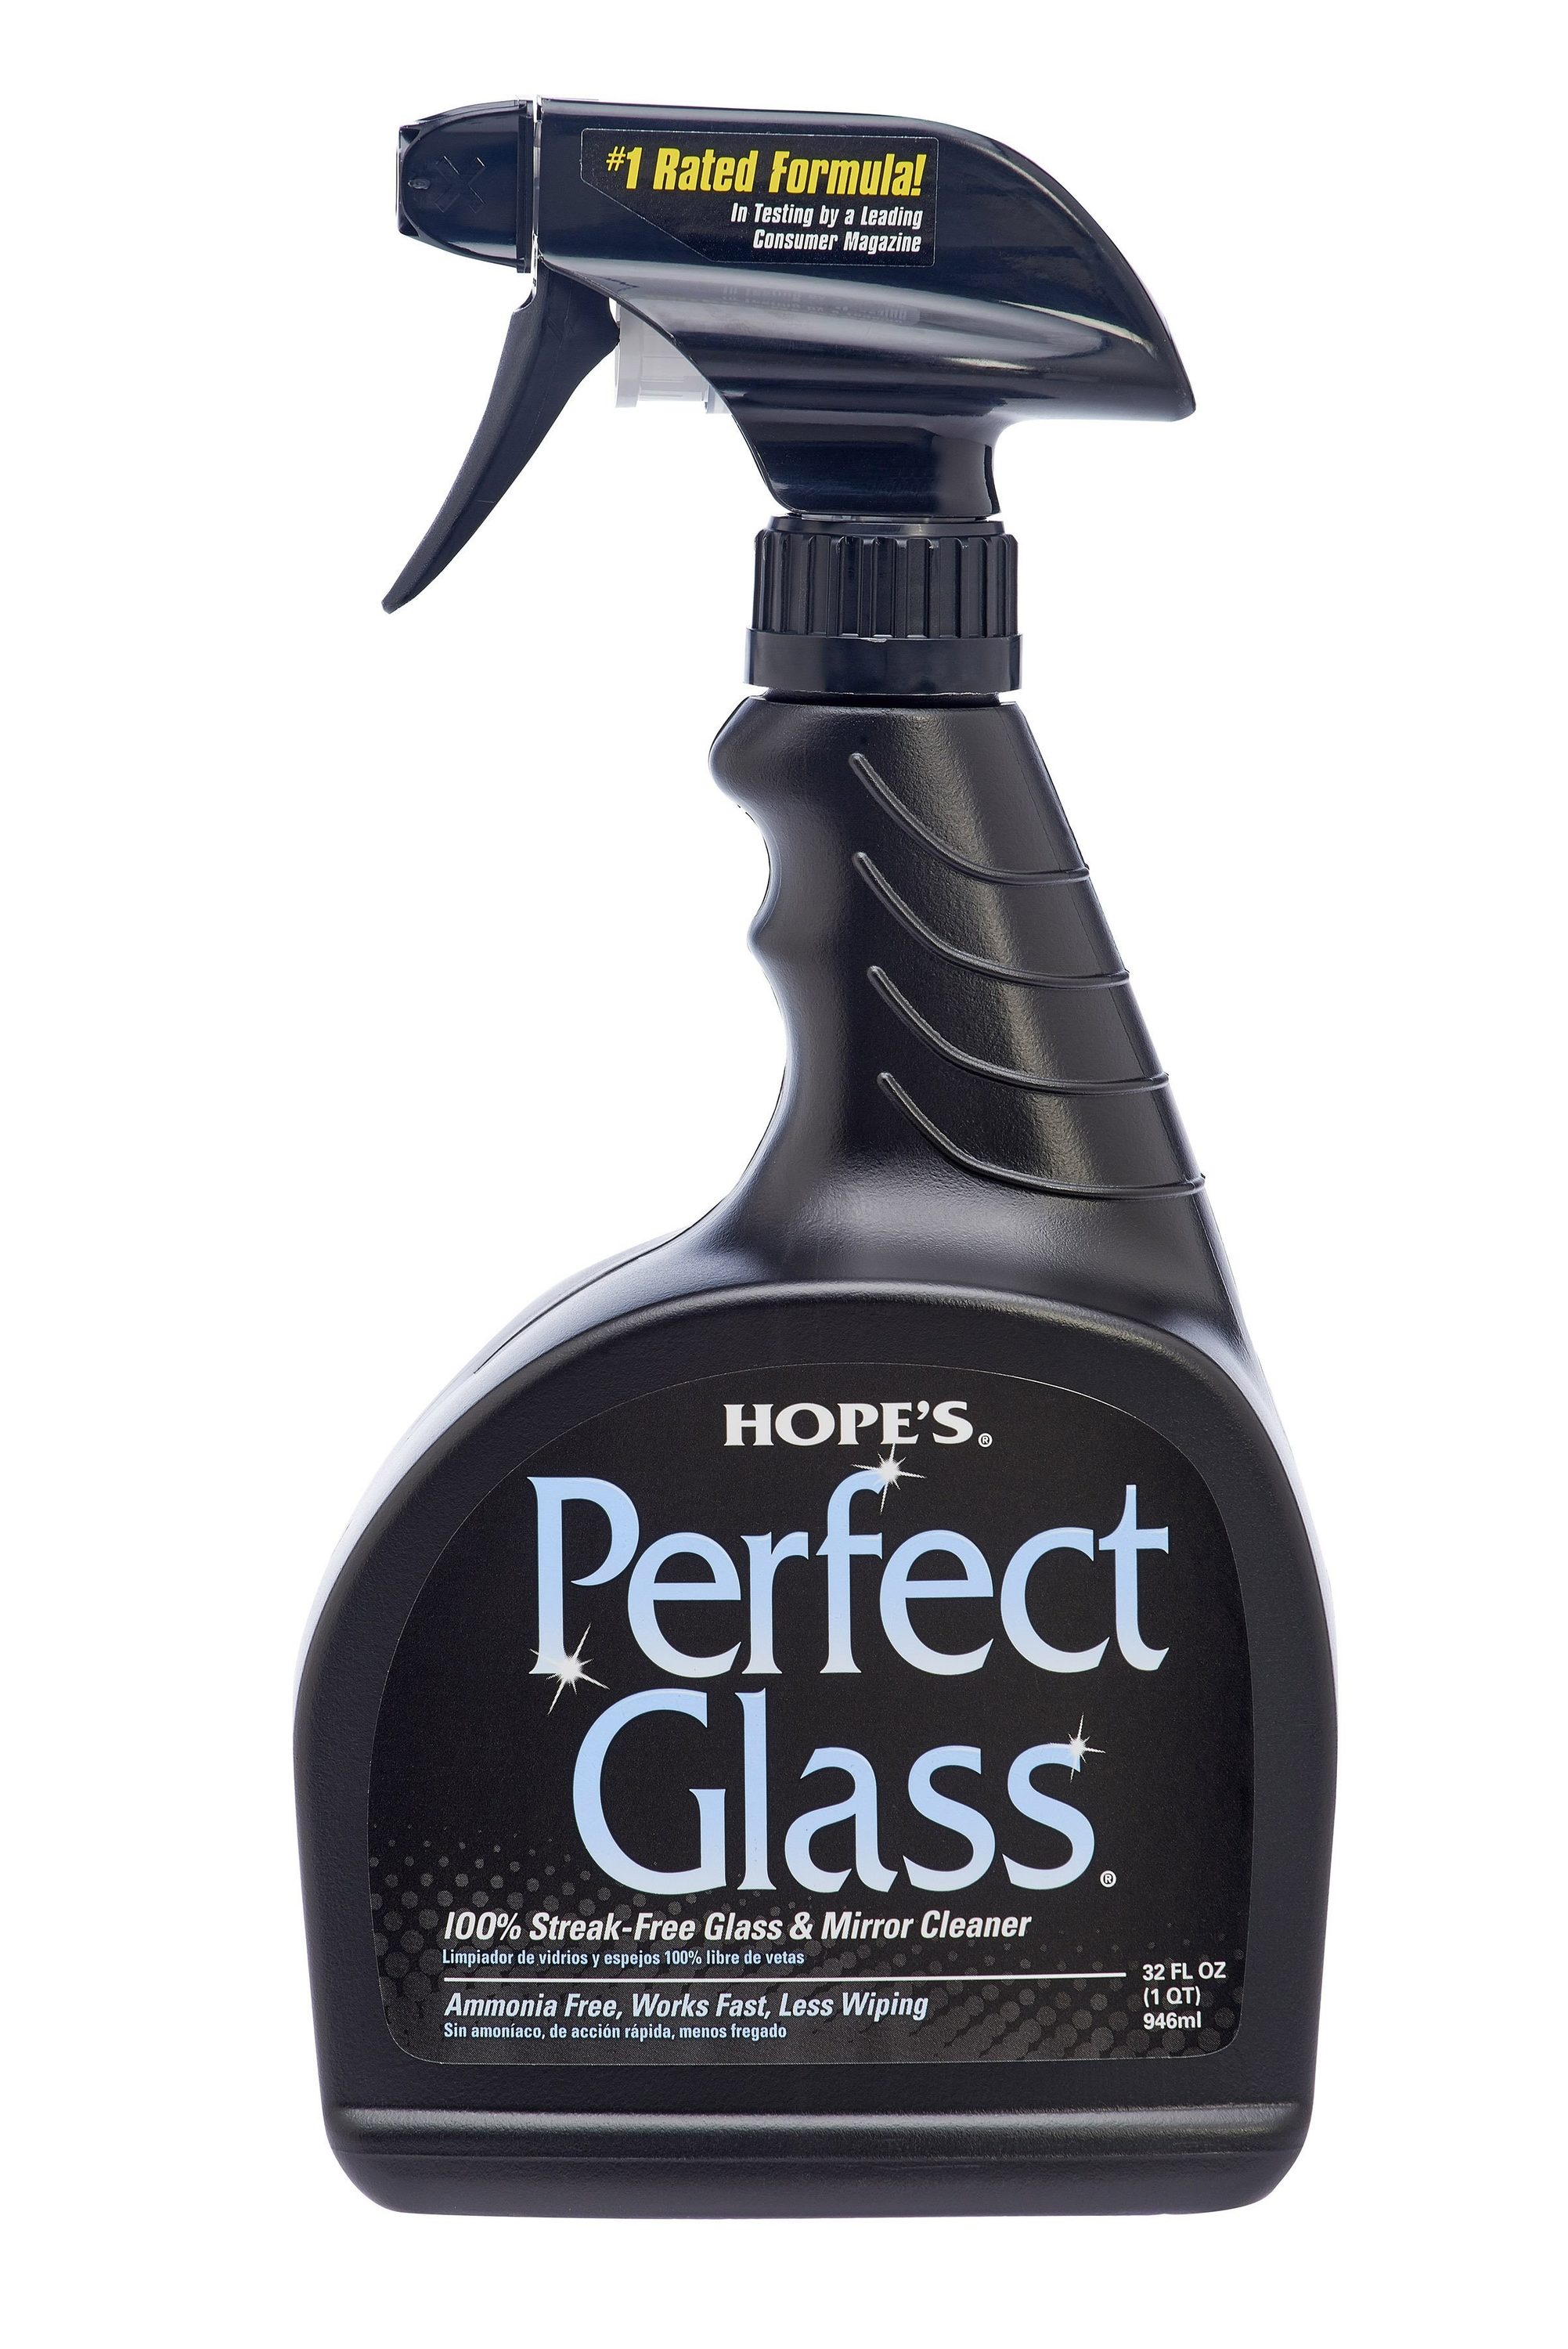 Hope's Perfect Glass Glass Cleaner - 32 oz